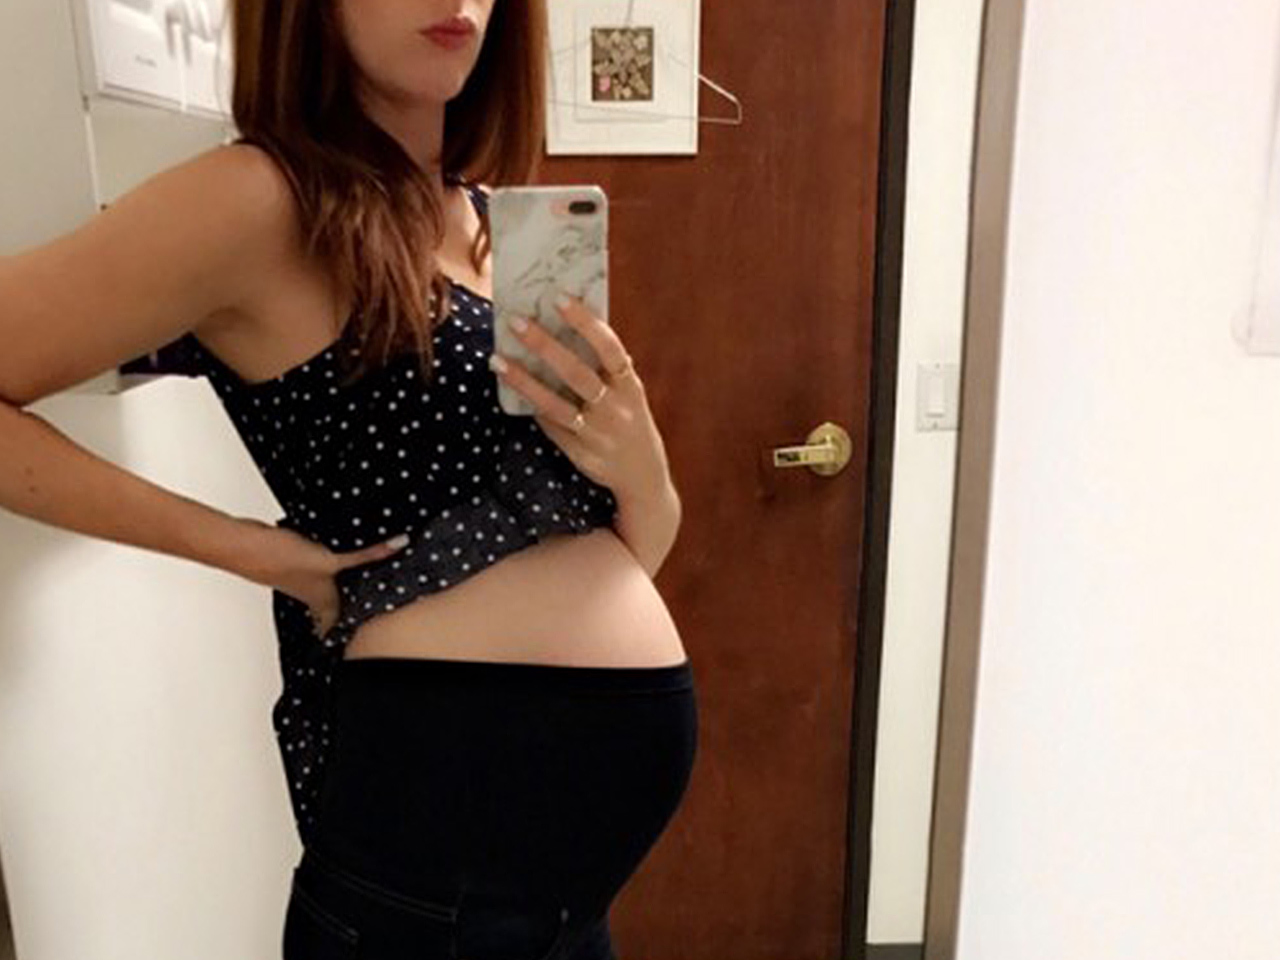 Pregnant woman takes a mirror selfie of her baby bump